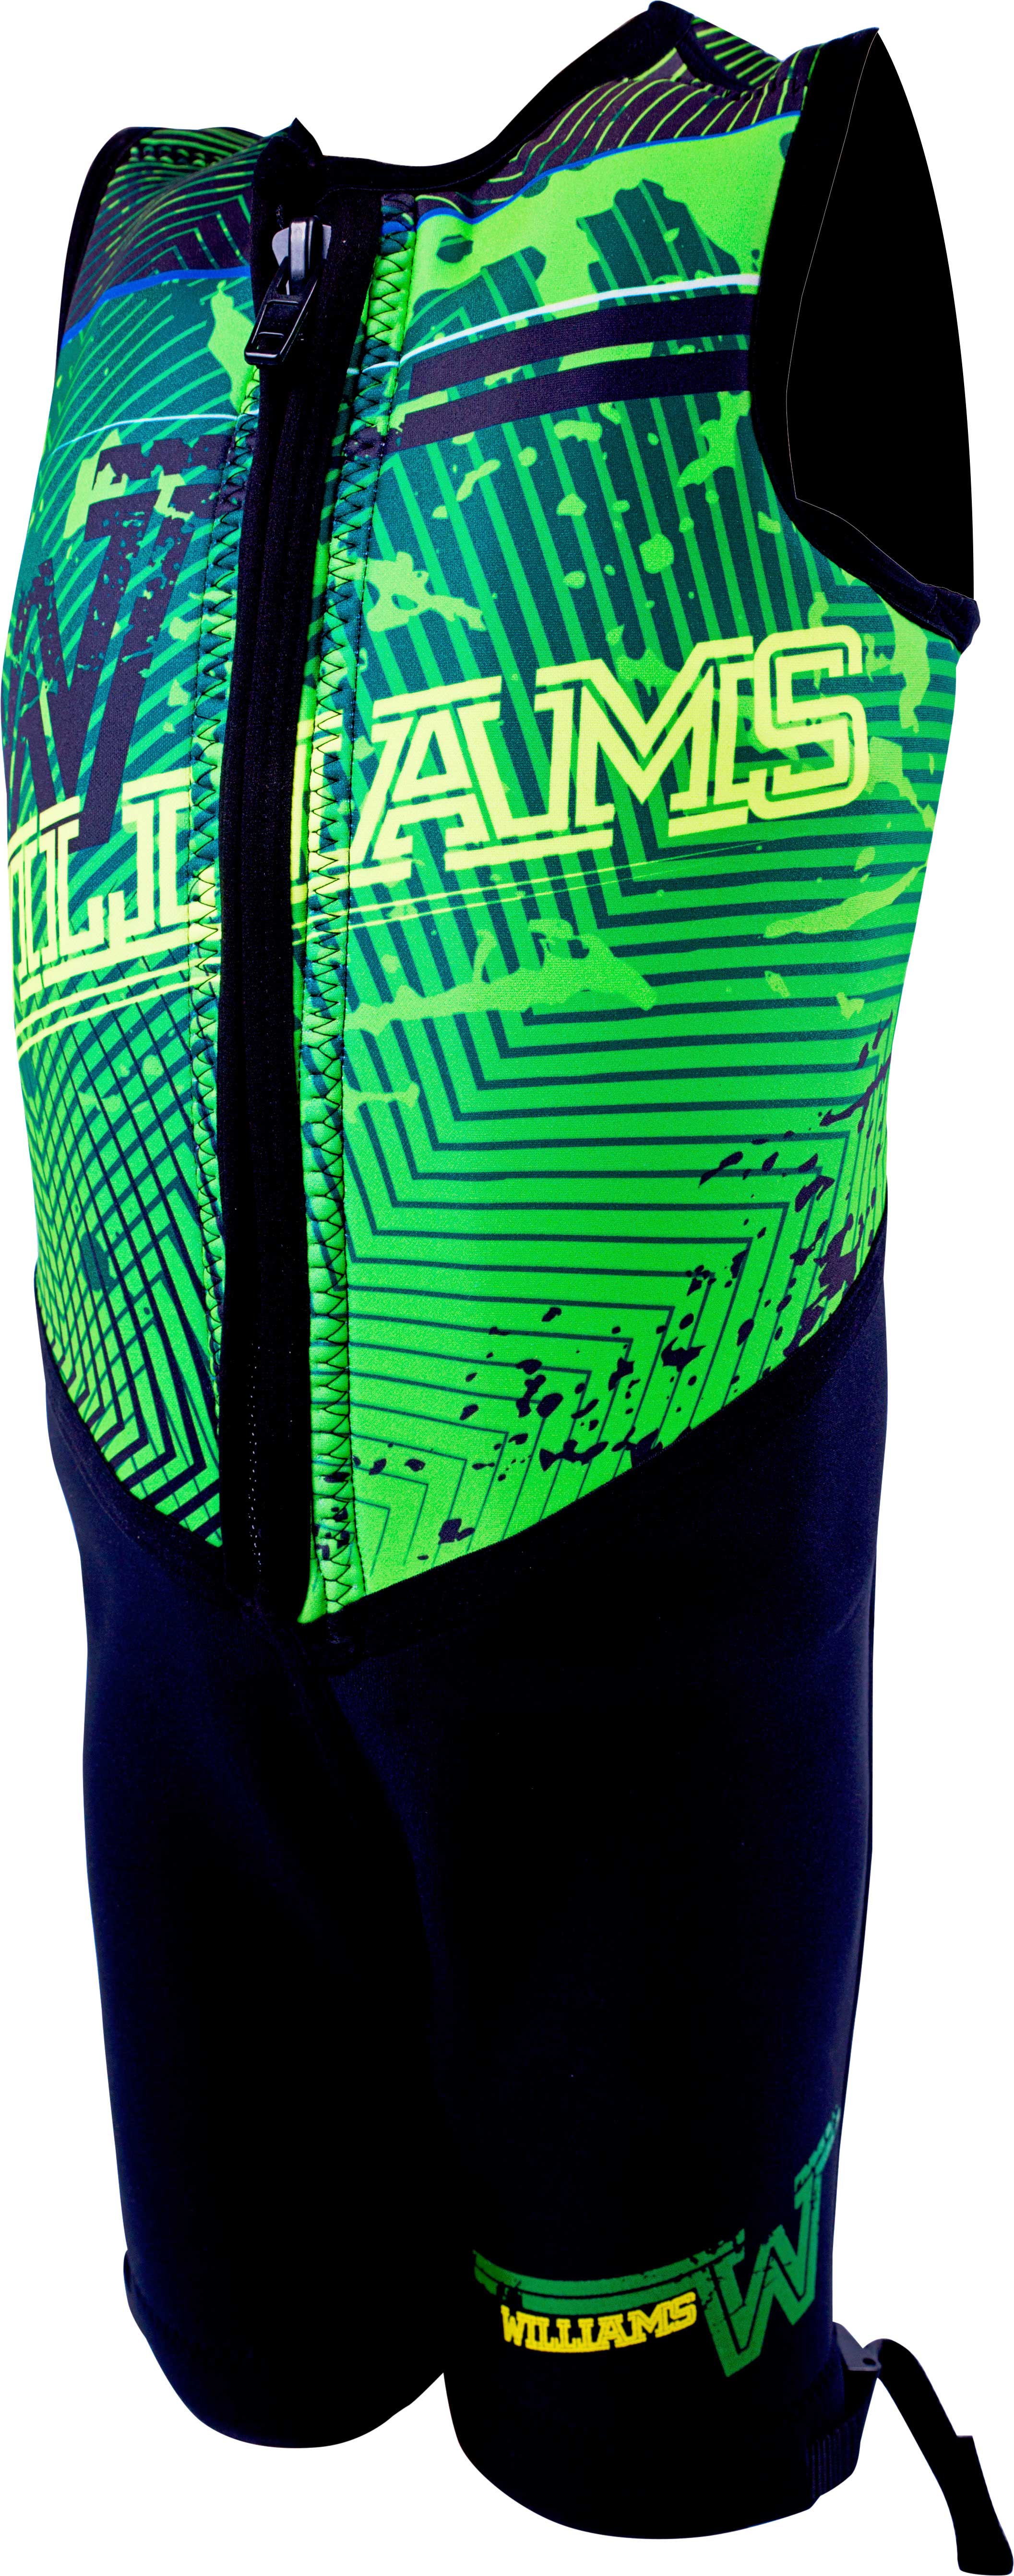 WILLIAMS YOUTH URBAN SPORTS BUOYANCY SUIT - GREEN